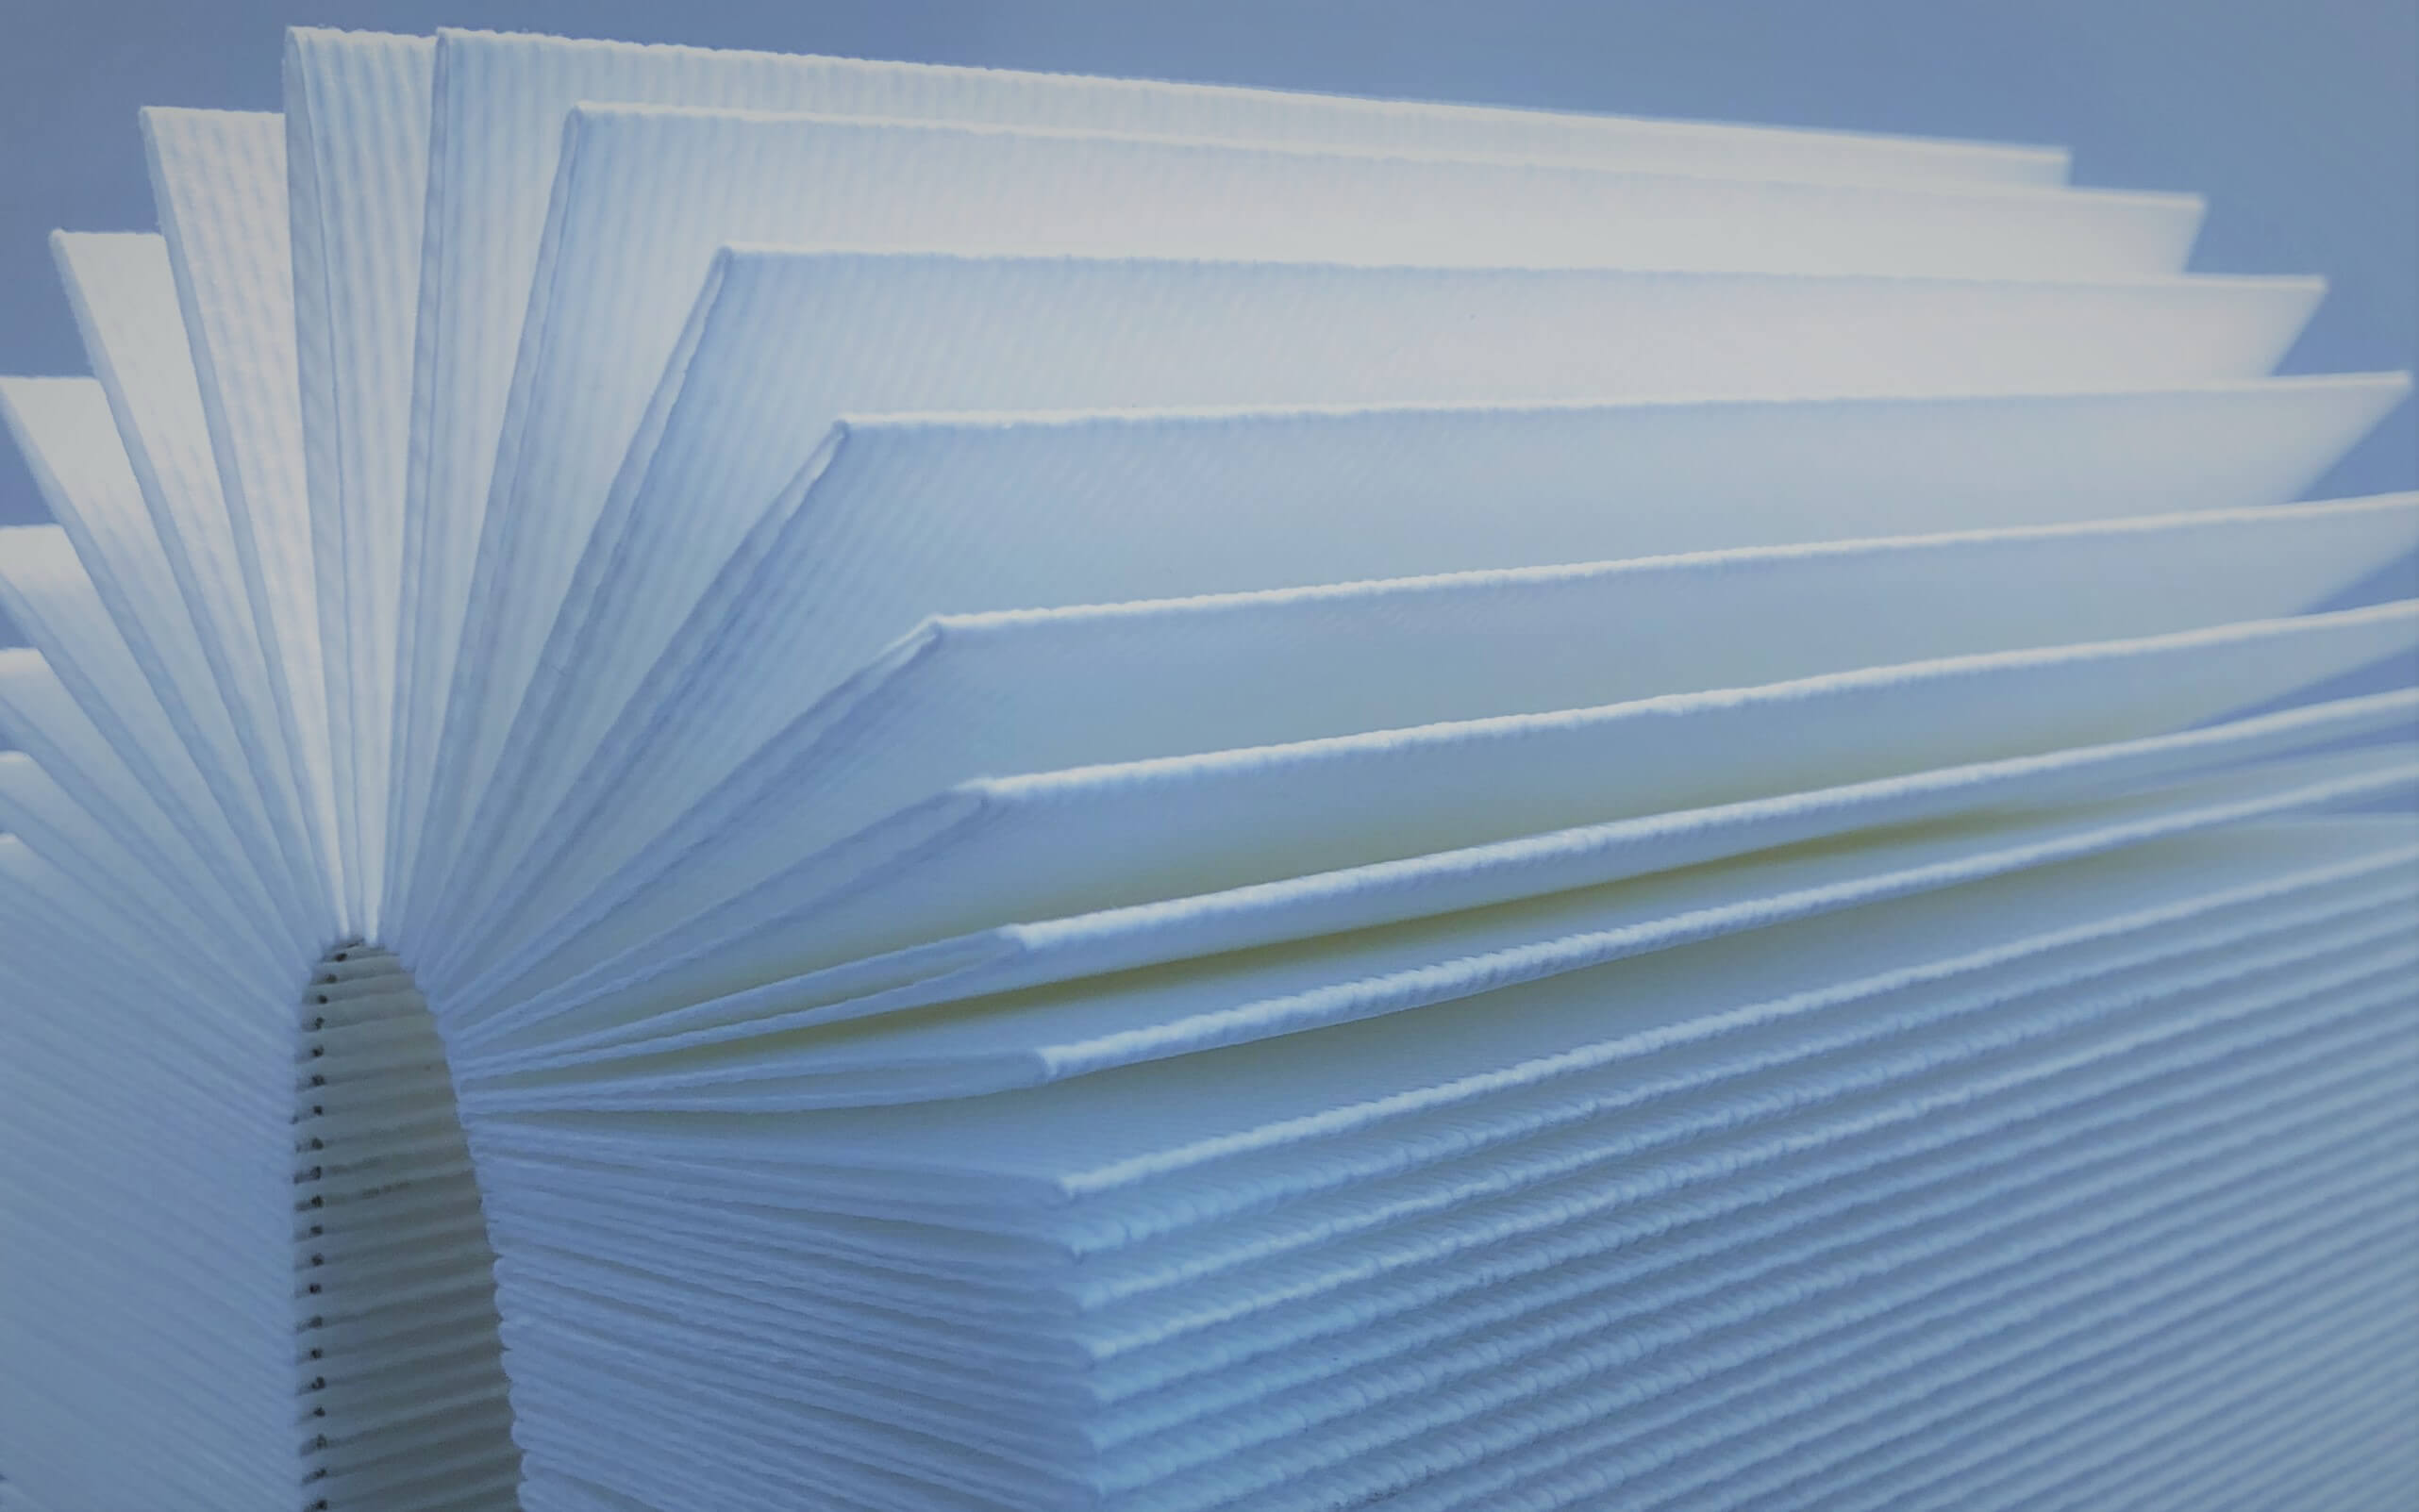 Cabin air filter material  Colback non woven media for particle